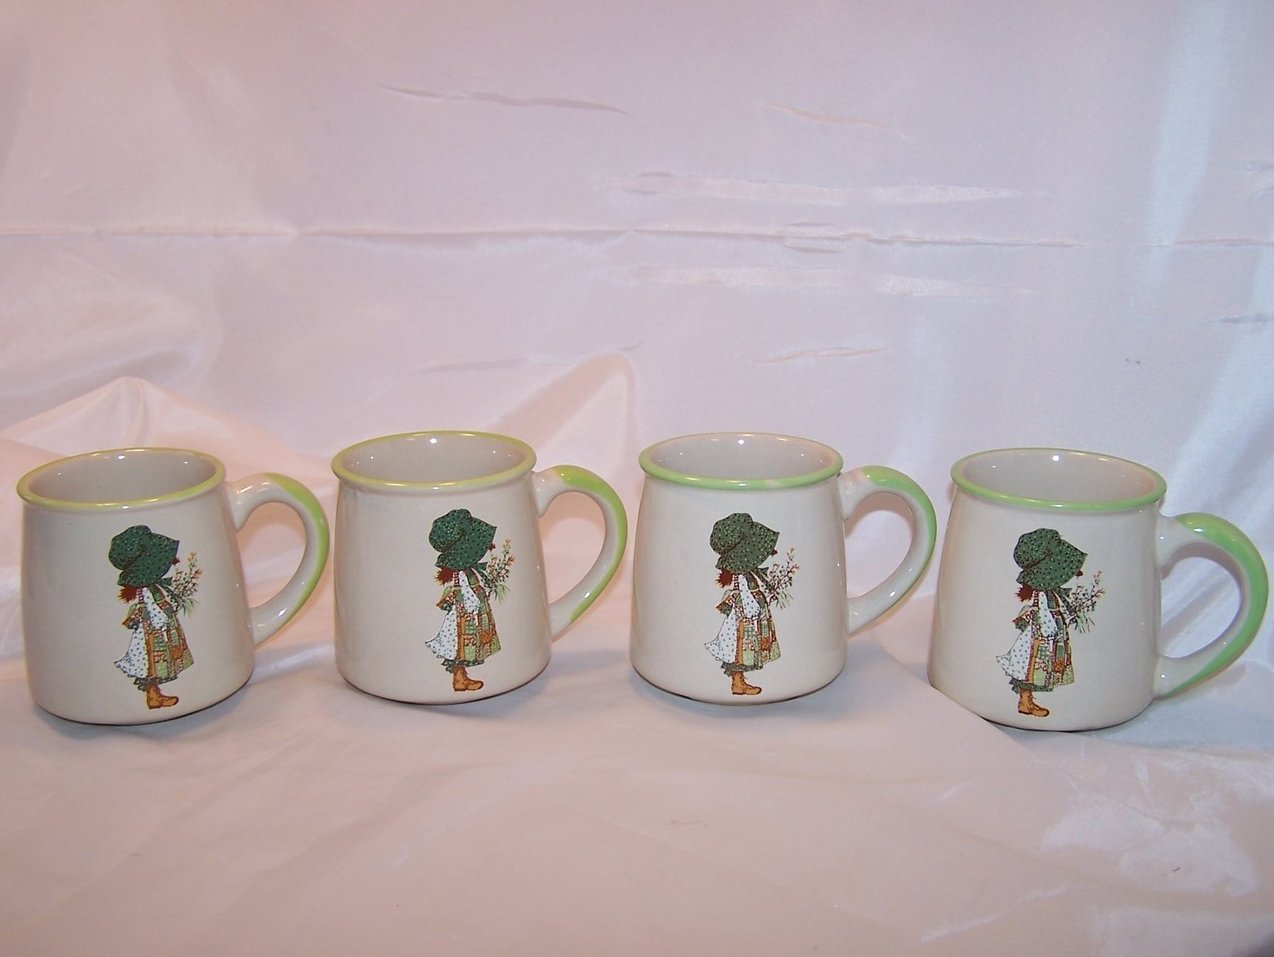 Image 2 of Holly Hobbie 4 Cup Mug Set with Wooden Stand